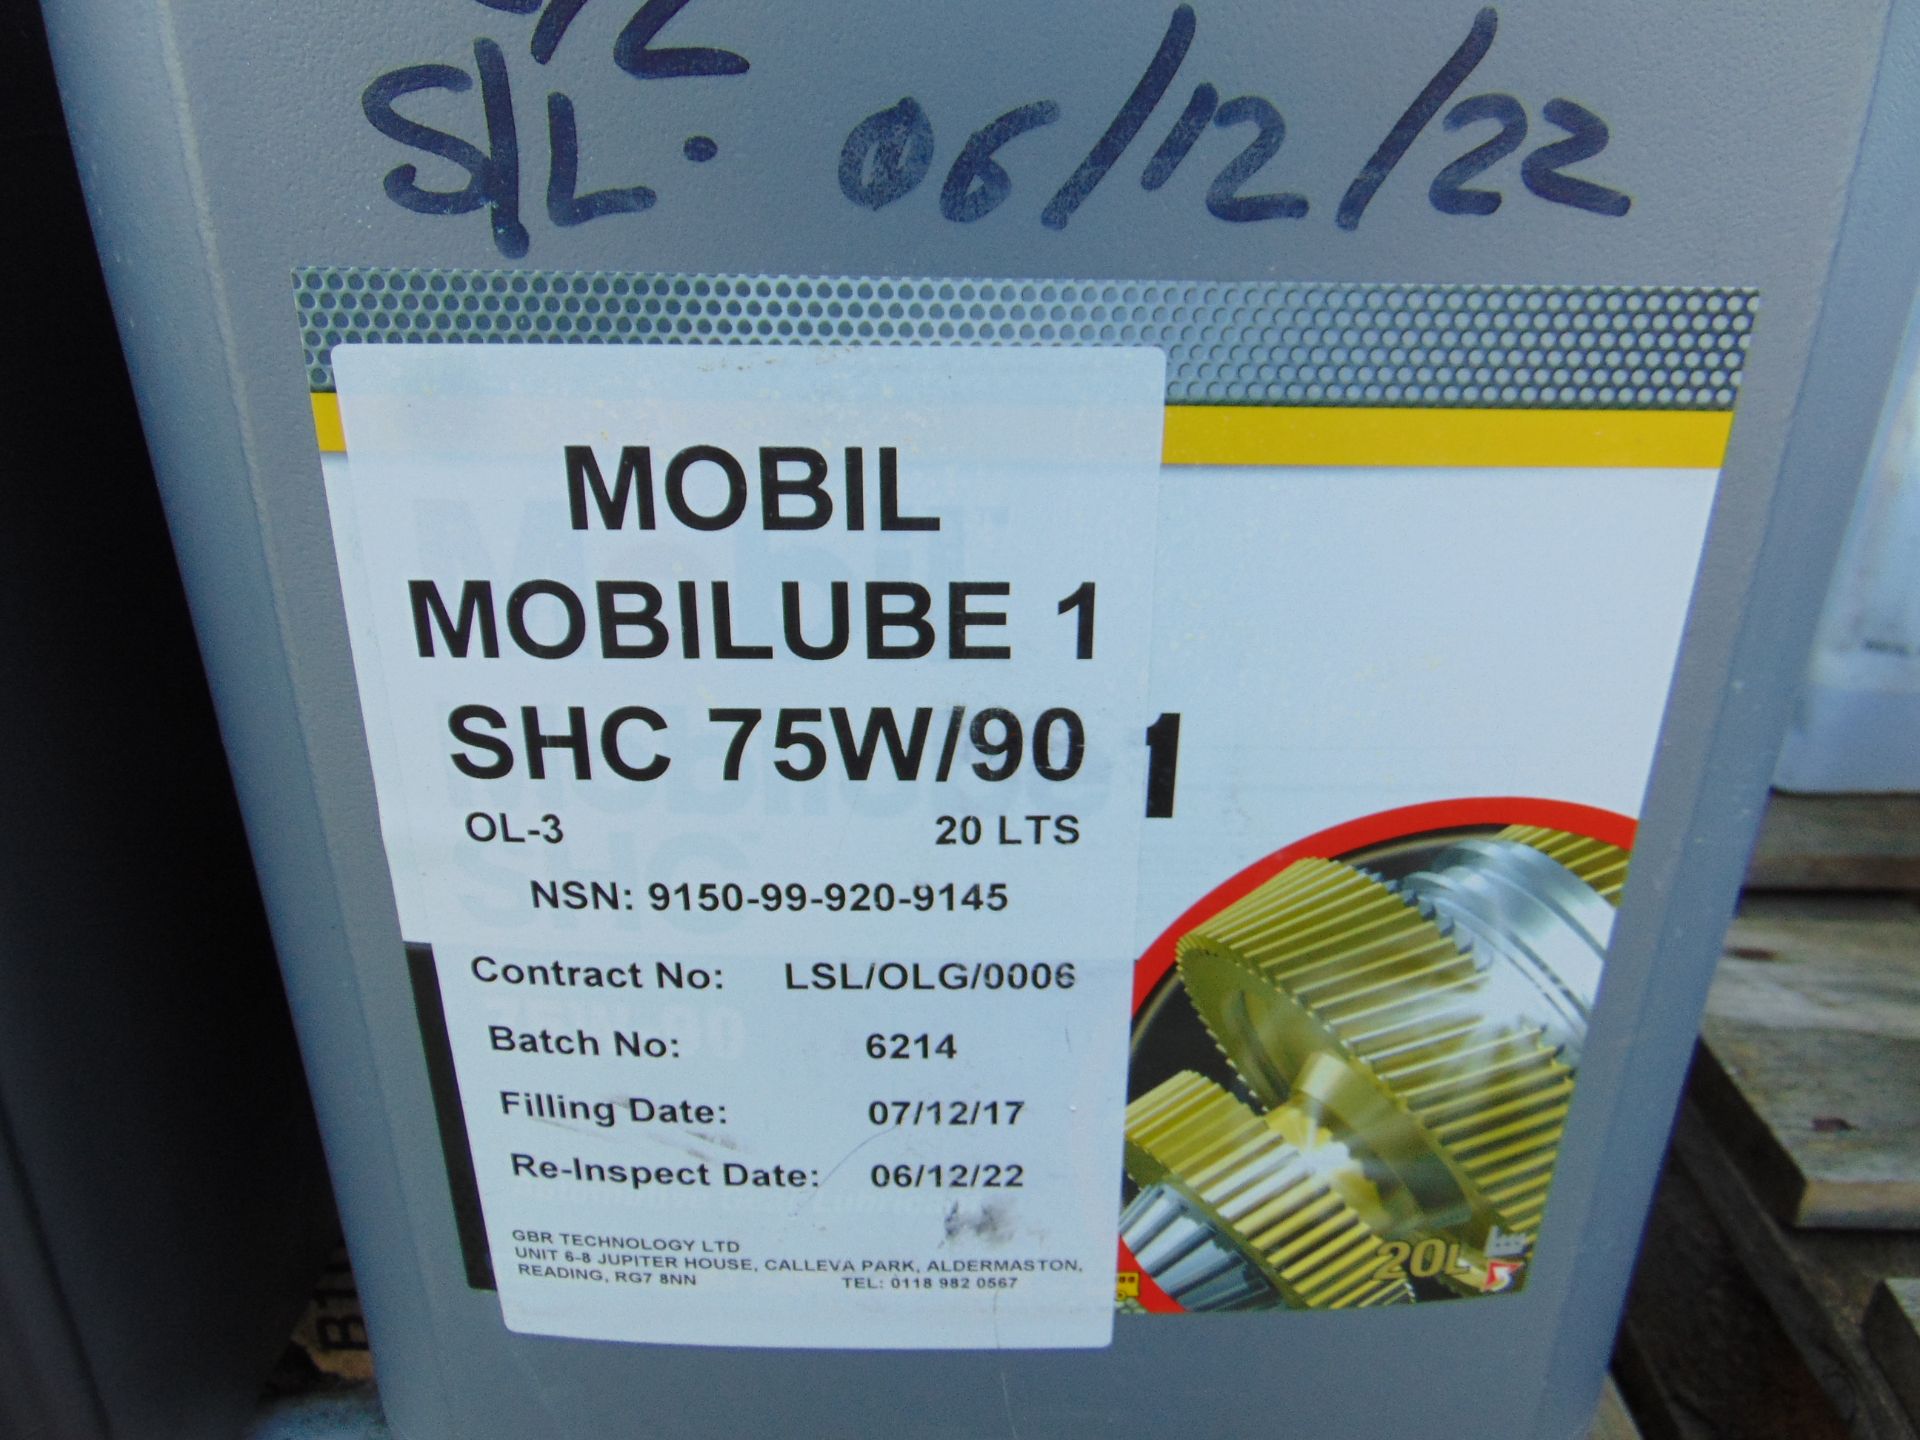 3x 20 litre Drums of Mobil Mobilube 1 SHC 75W90 High Performance Synthetic Gear Oil - Image 2 of 2